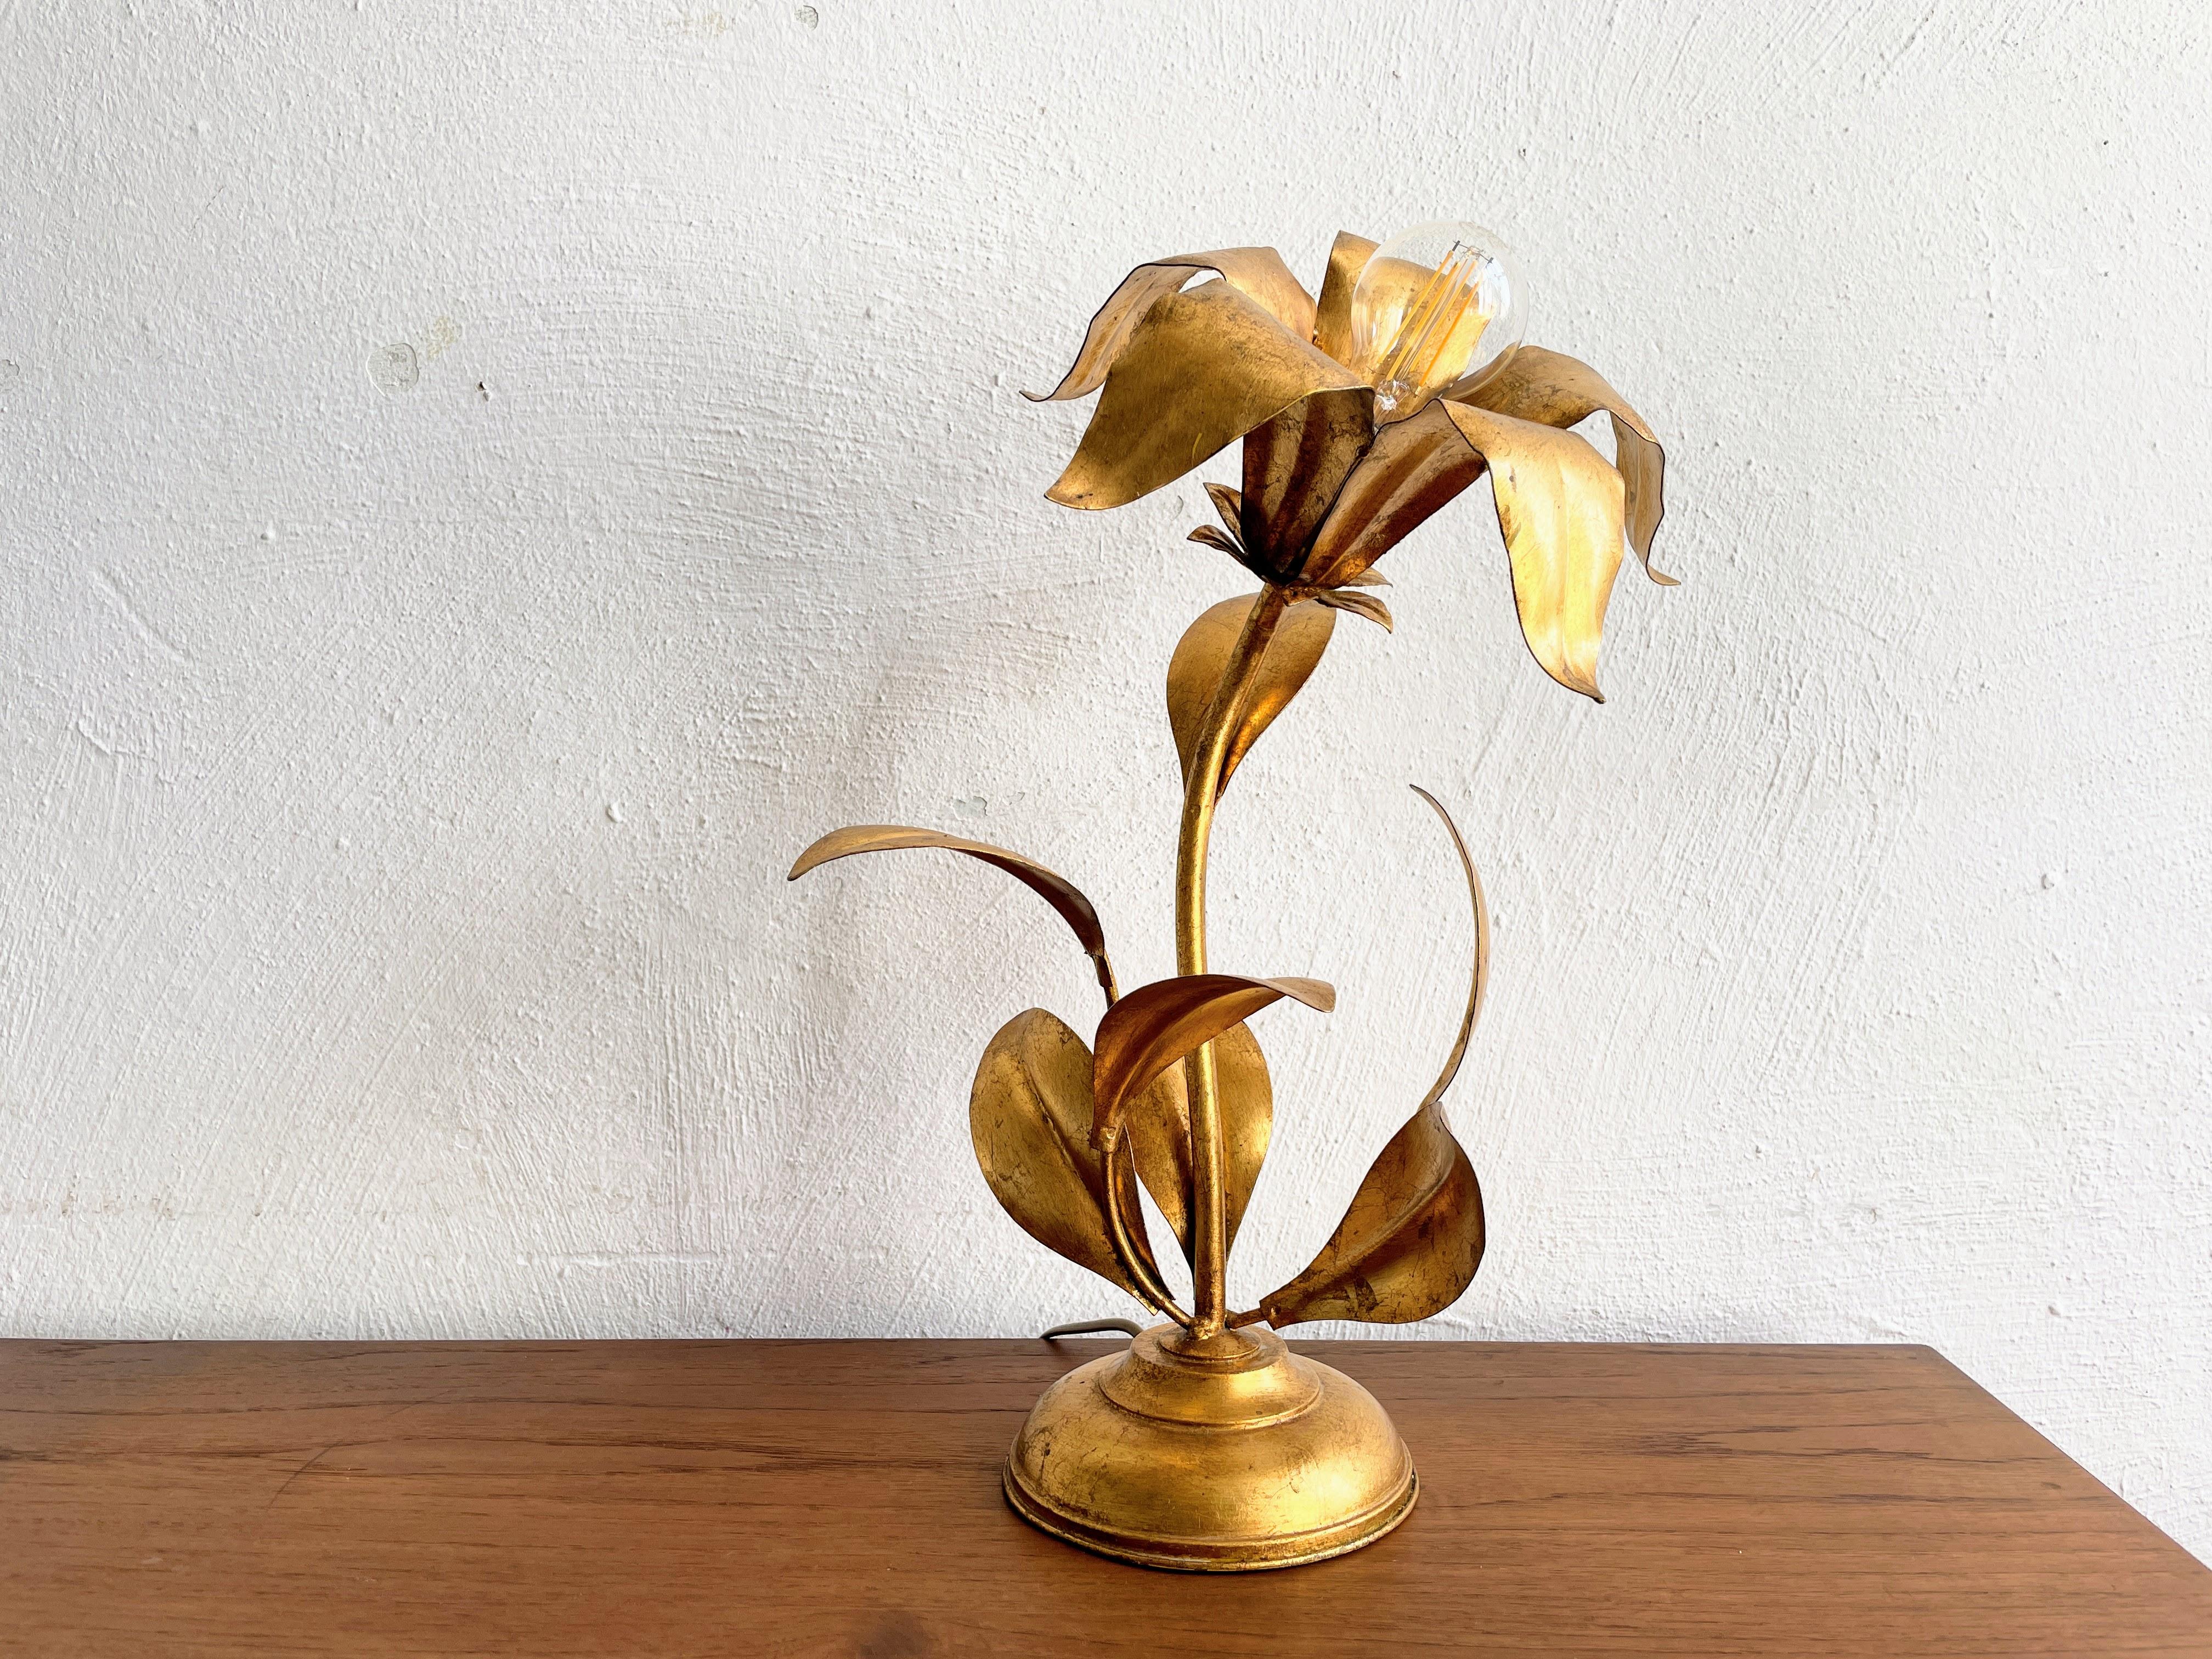 golden Hollywood Regency Style Flower-Shaped Table Lamp 

Description:
Illuminate your space with timeless elegance using our exquisite Hollywood Regency-style table lamp. Crafted in the iconic Florentine tradition, this lamp takes the form of a